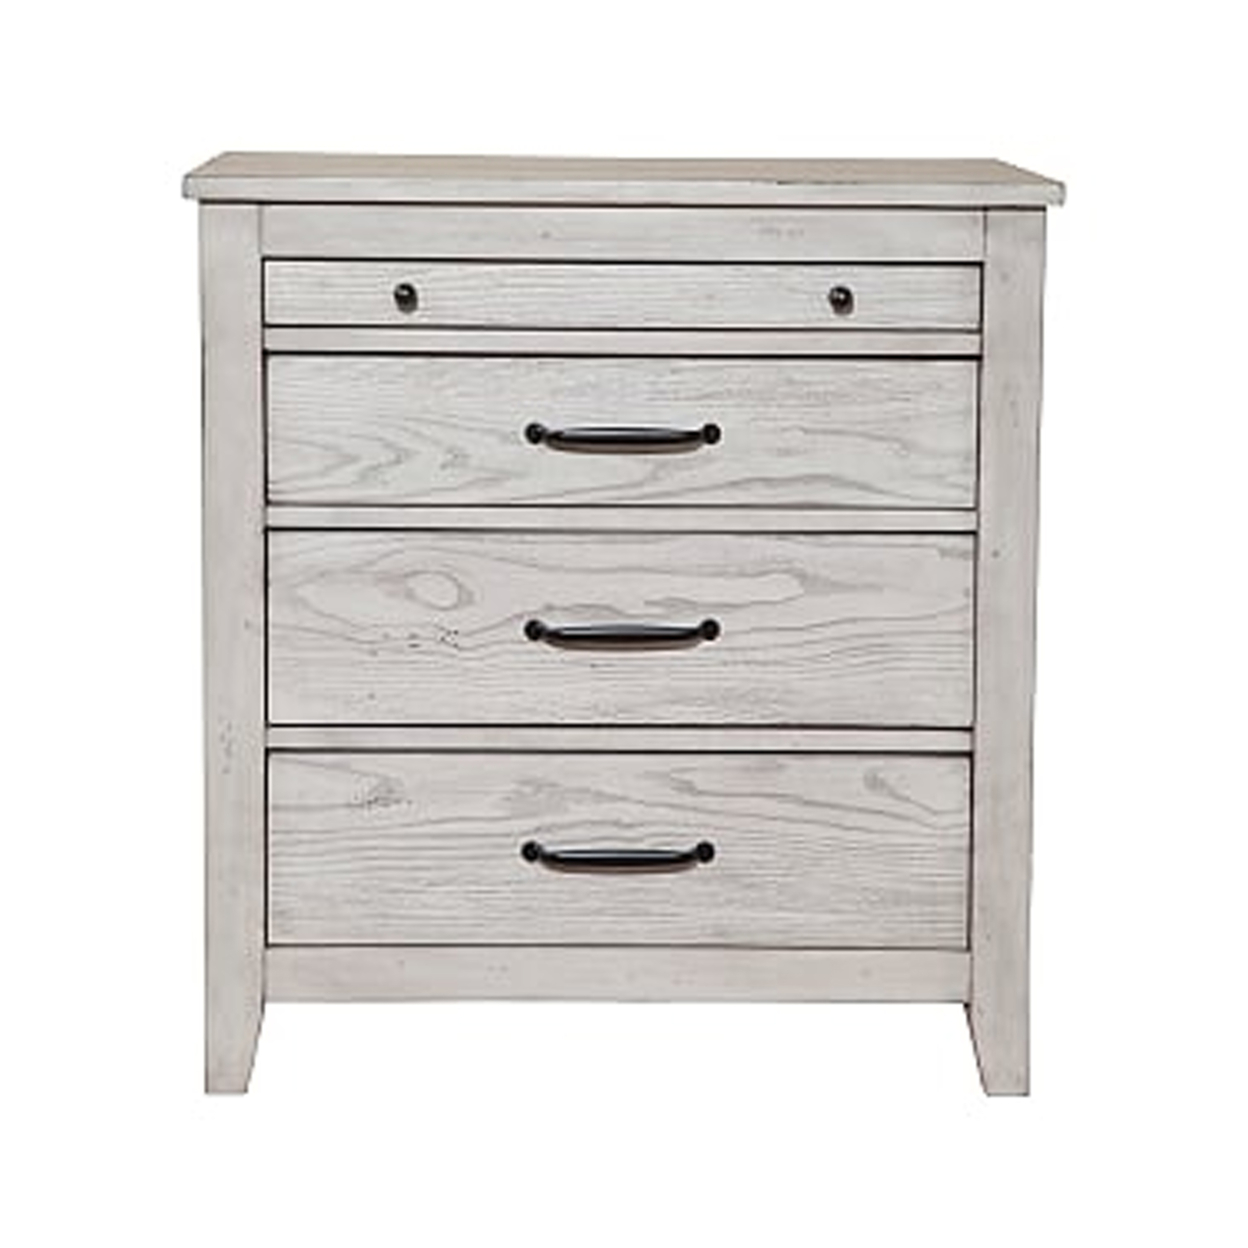 Transitional Style Three Drawer Nightstand With Pull Out Tray, Gray- Saltoro Sherpi